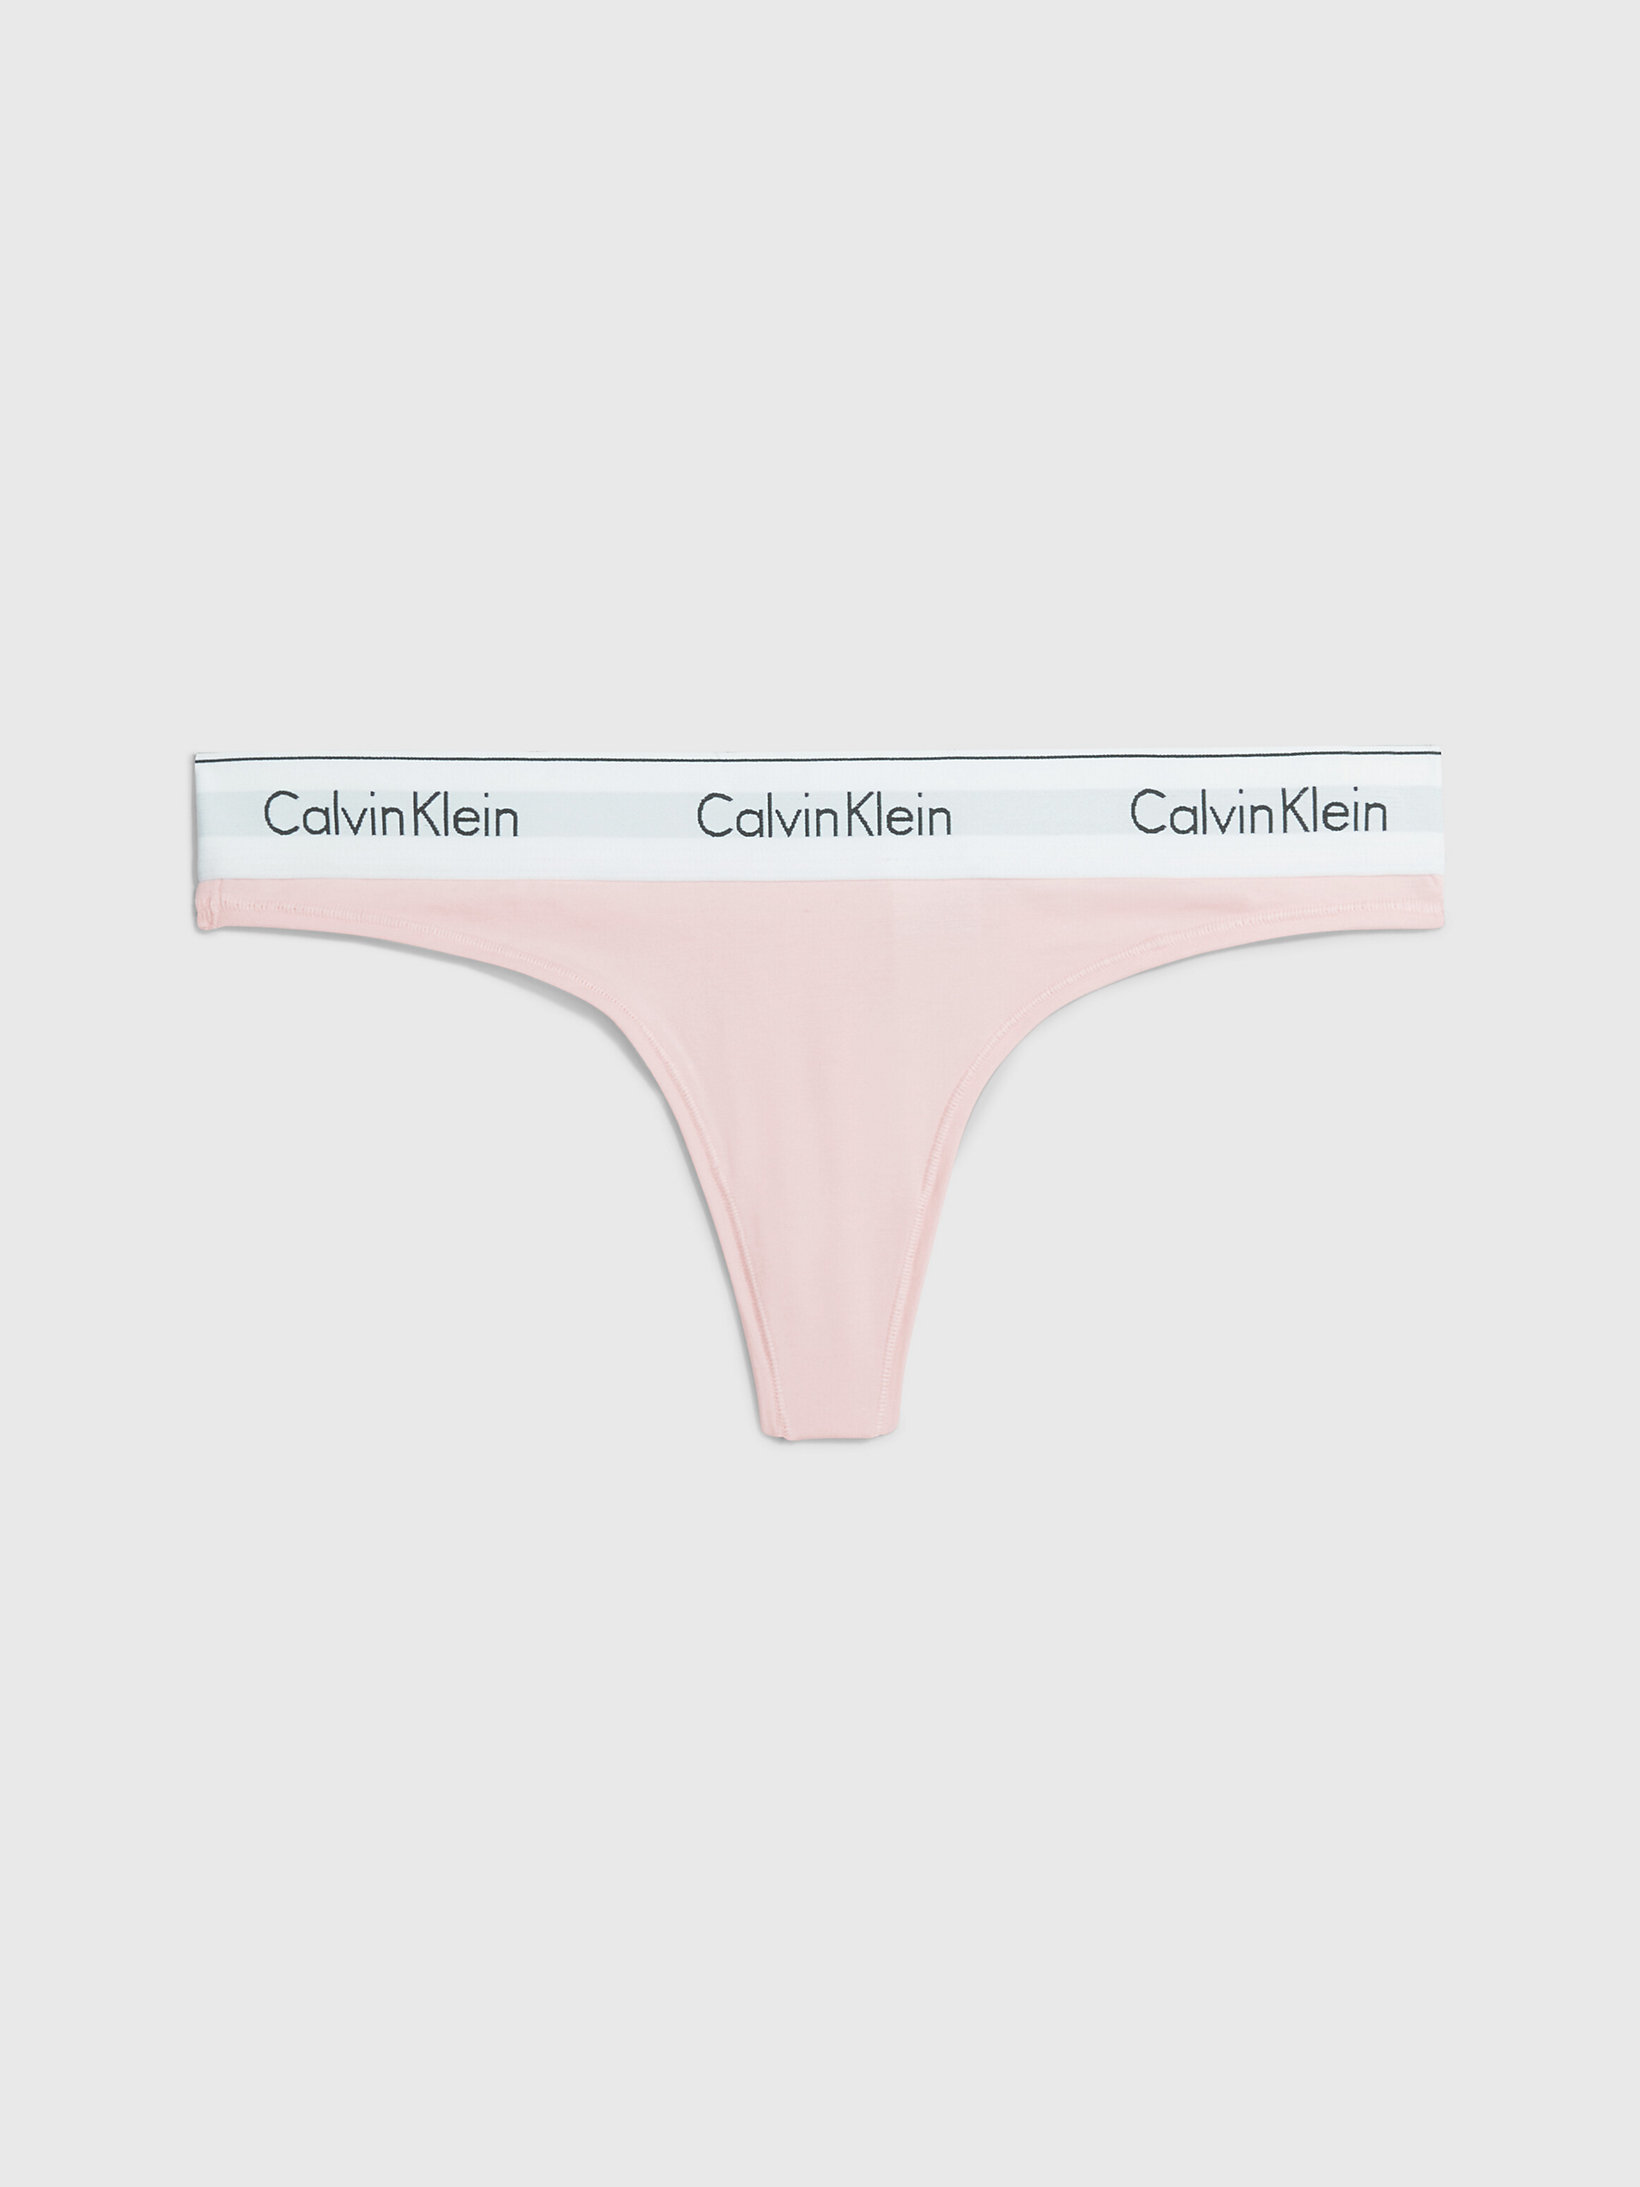 Tanga - Modern Cotton > Nymphs Thigh > undefined mujer > Calvin Klein